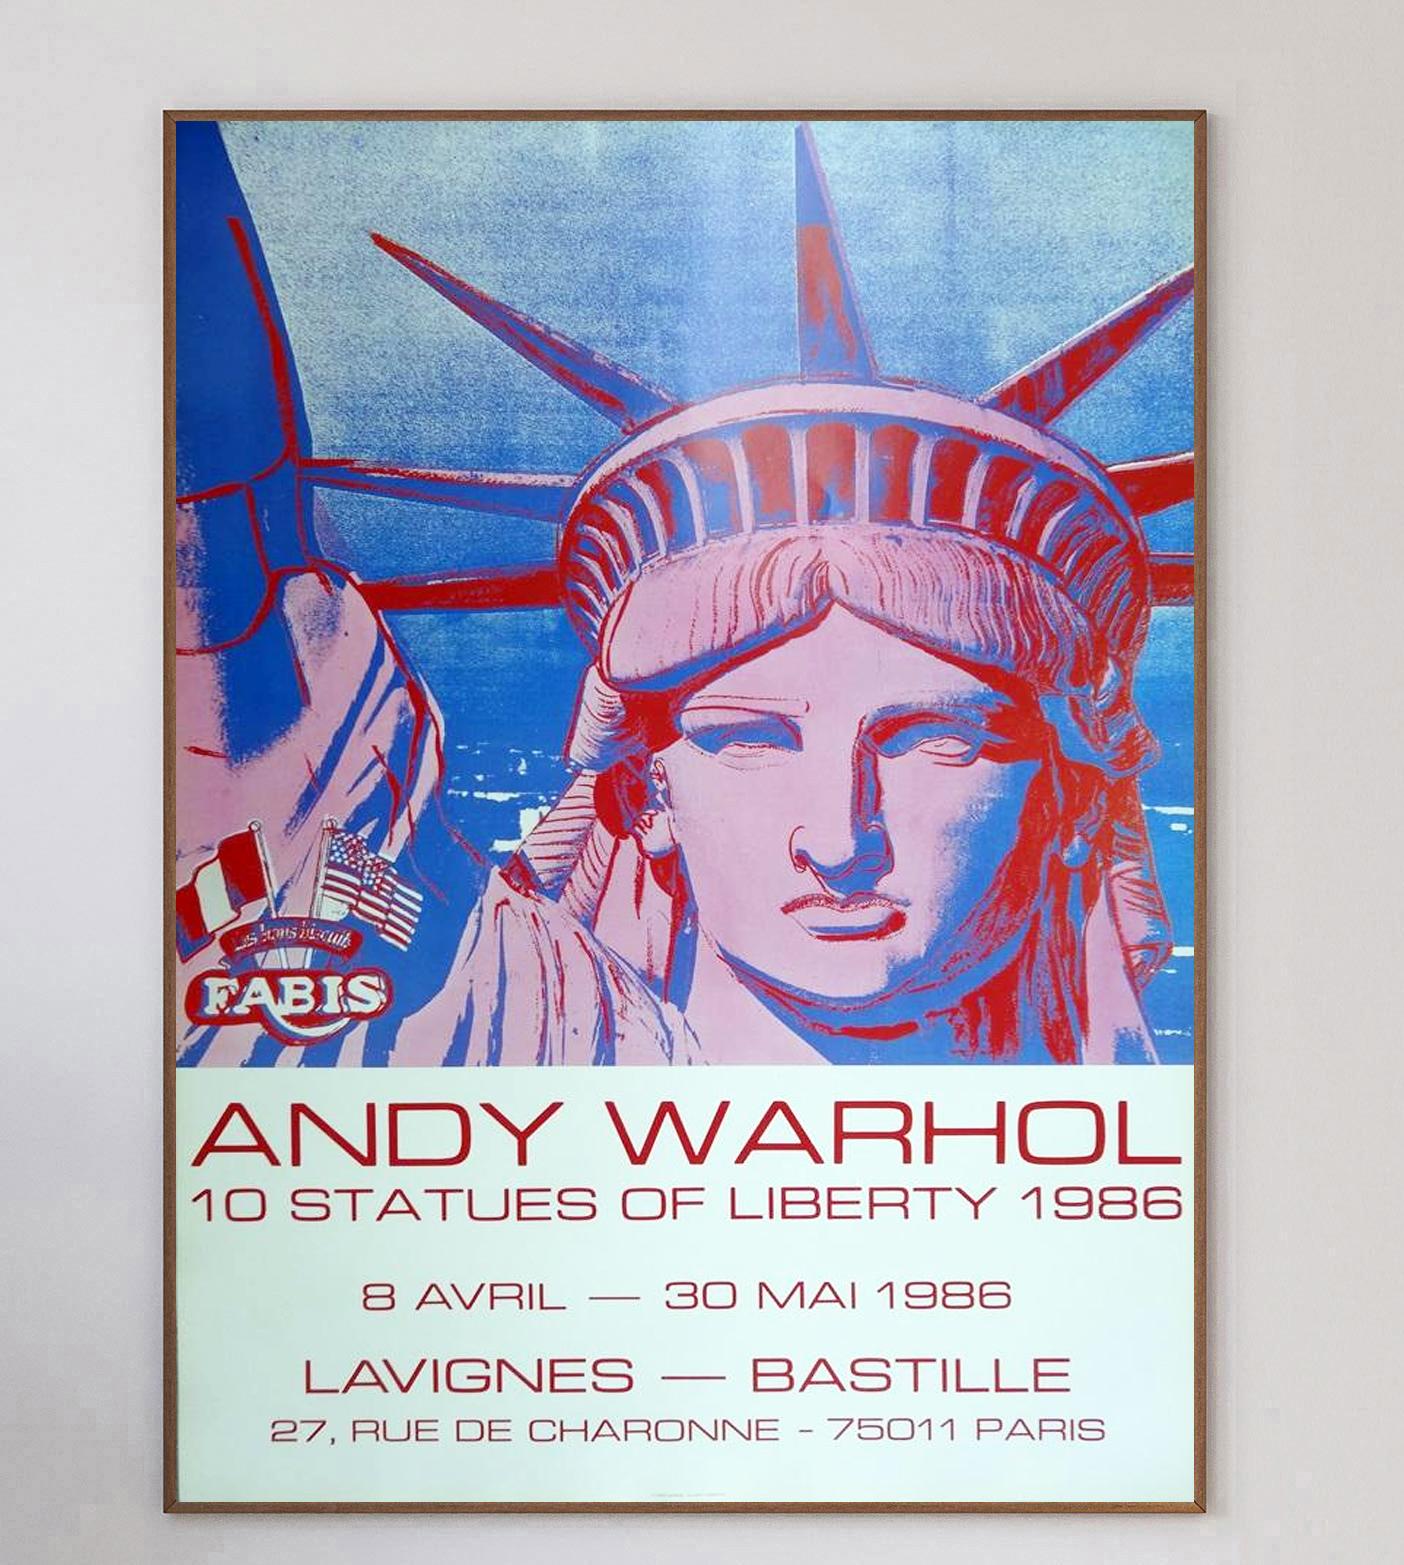 This wonderful poster was created for the Andy Warhol exhibition at the Galerie Lavigne in 1986. Featuring his iconic artwork of the same year, a reassessment of his earlier 1962 work, this stunning and extremely rare offset lithograph is on heavy